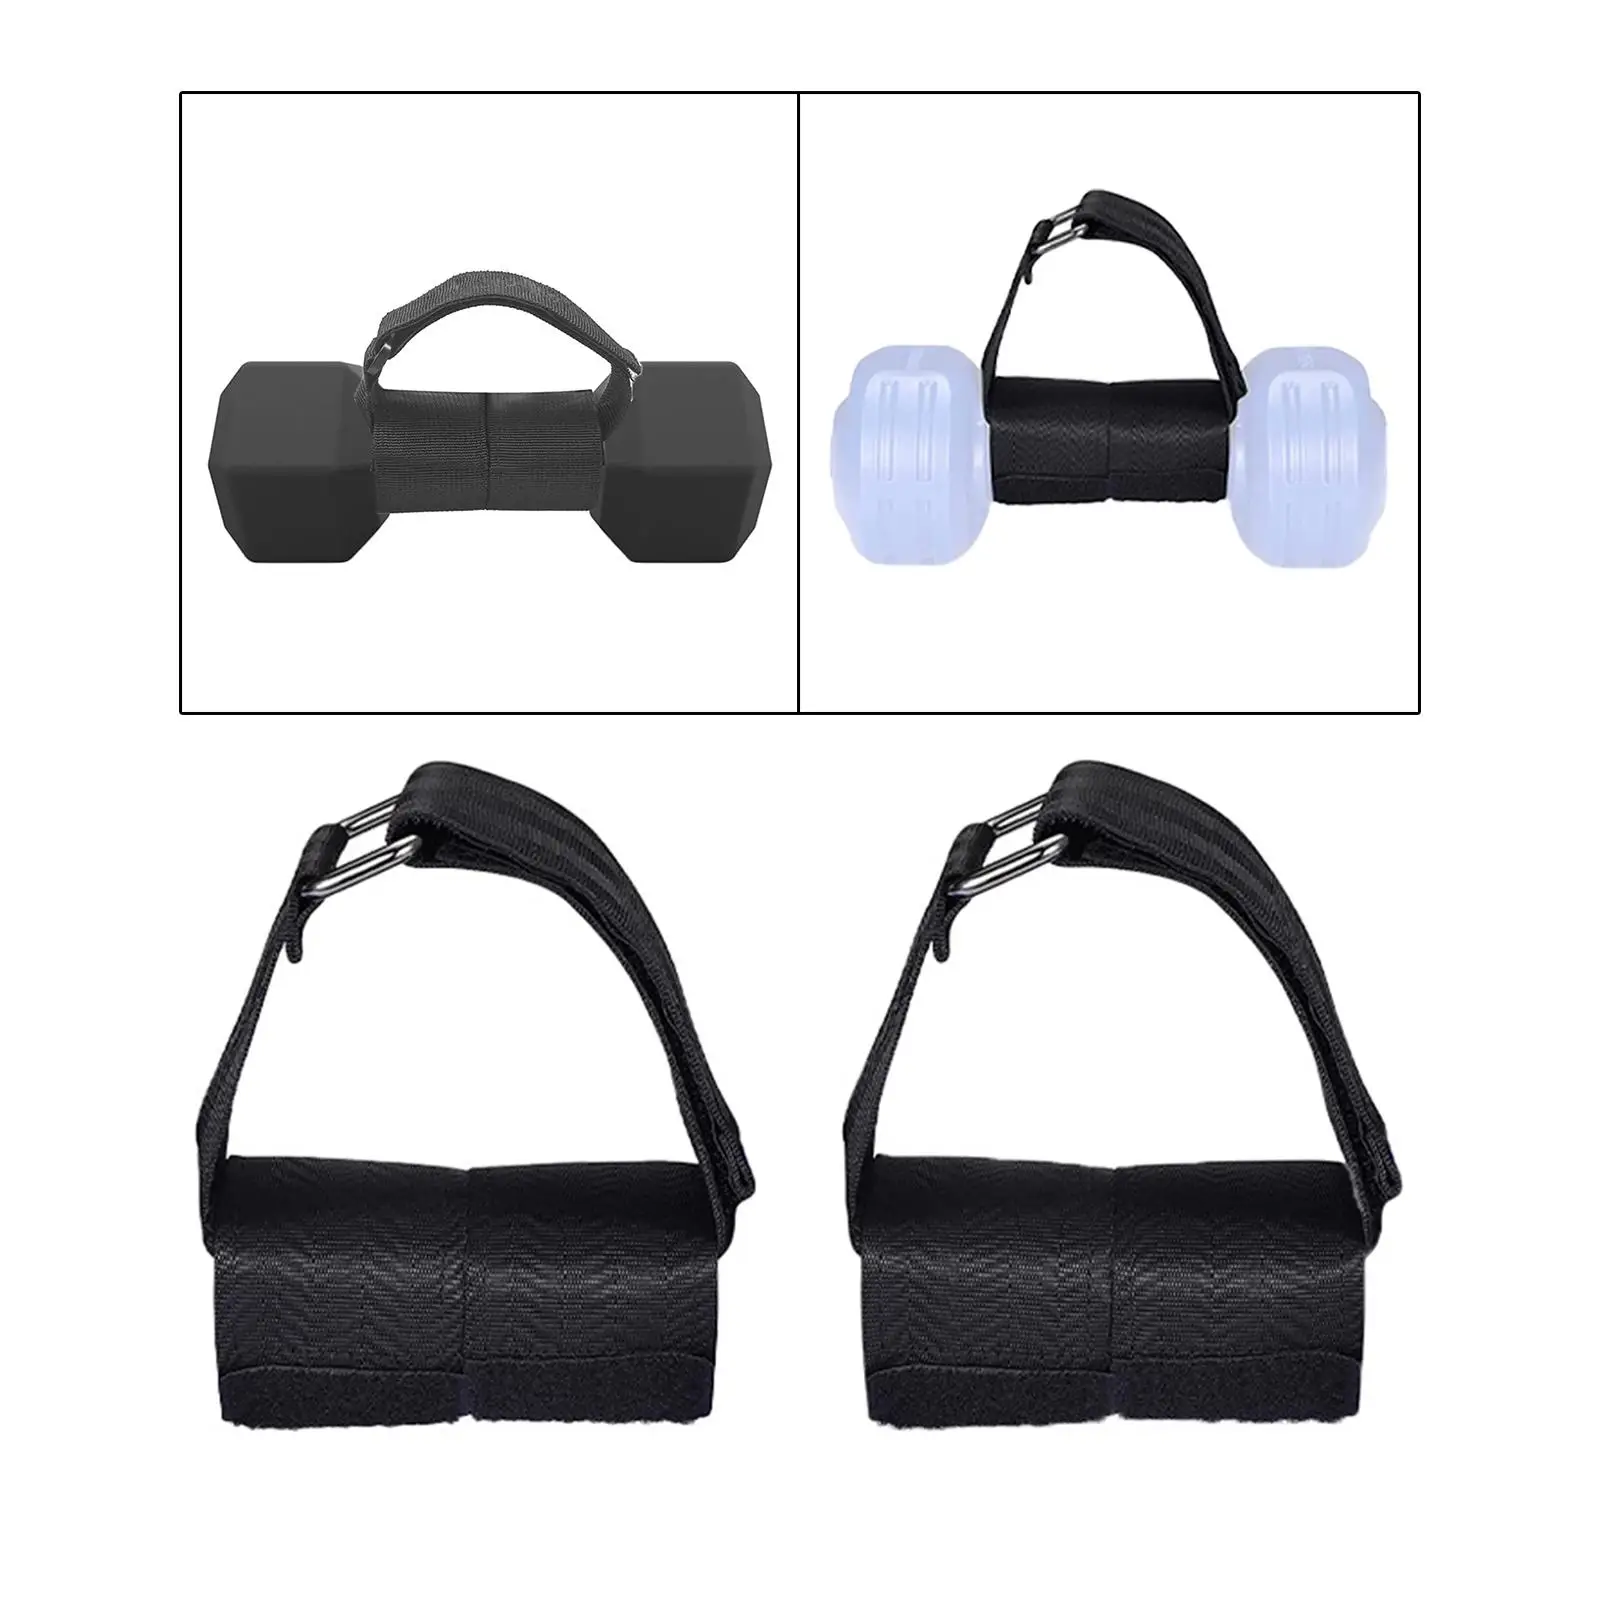 2x Adjustable Weight Dumbbell Ankle Straps Durable Dumbbell Shoes Attachment for